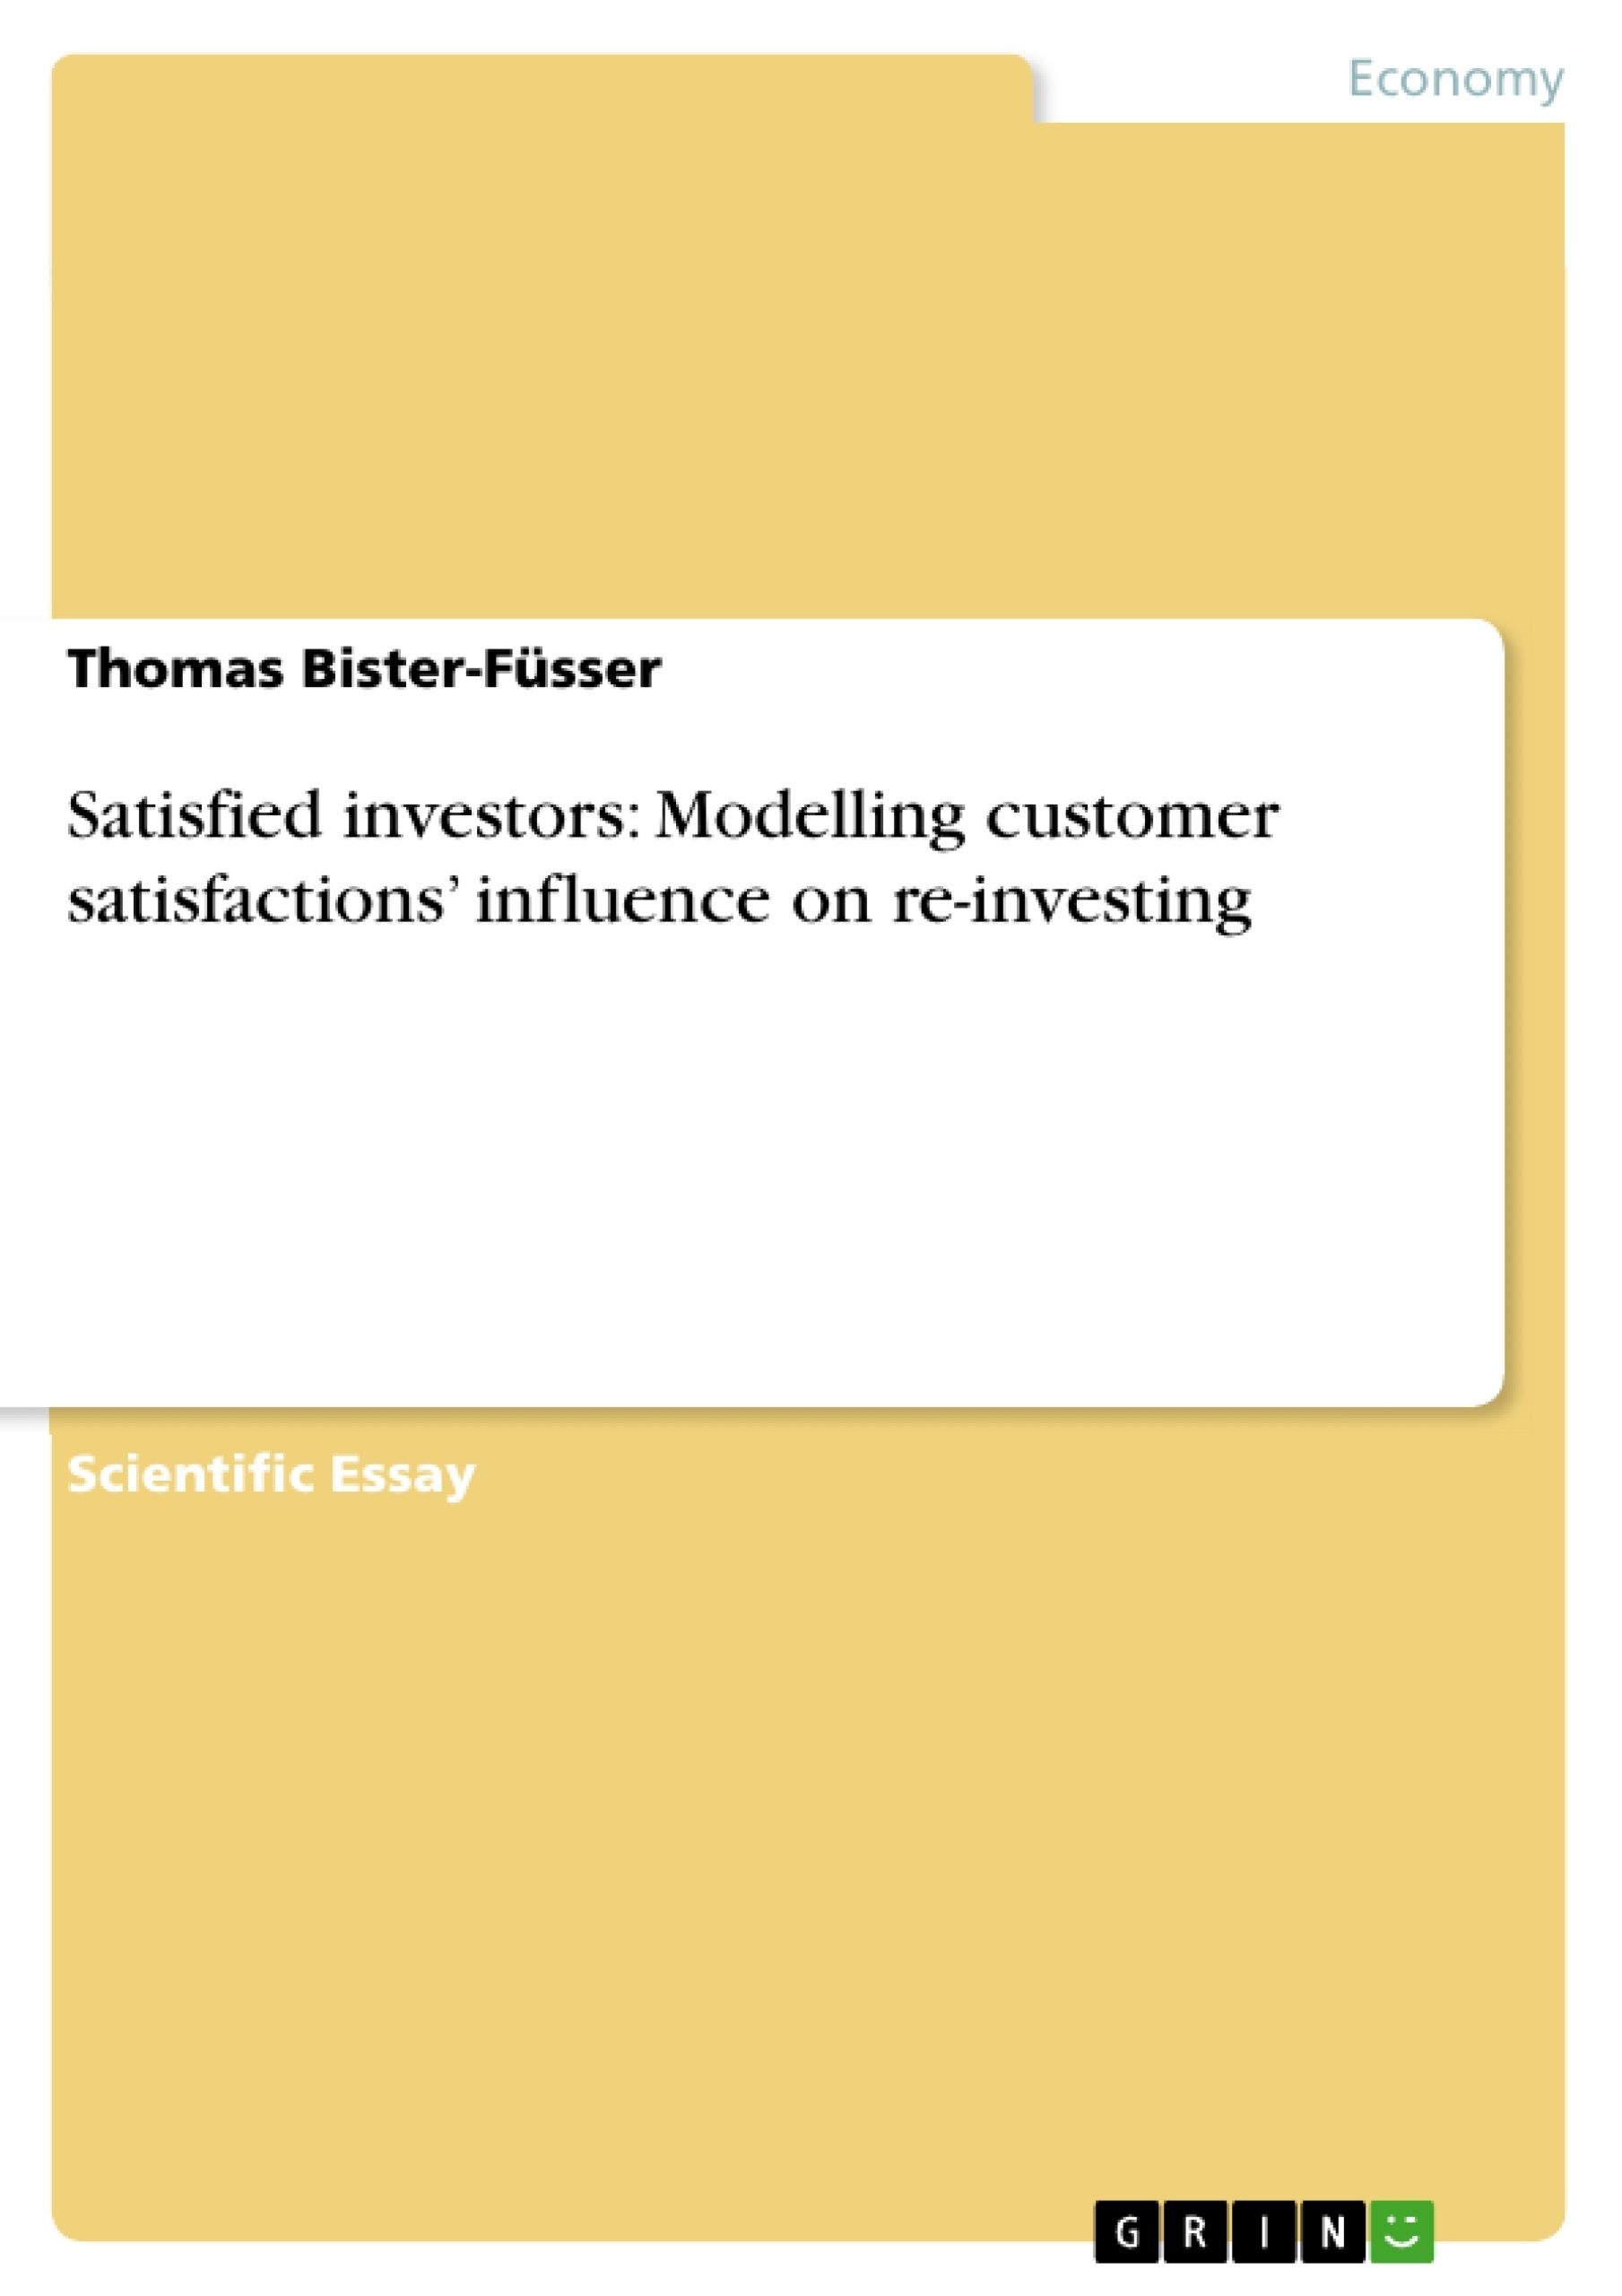 Titel: Satisfied investors: Modelling customer satisfactions’ influence on re-investing